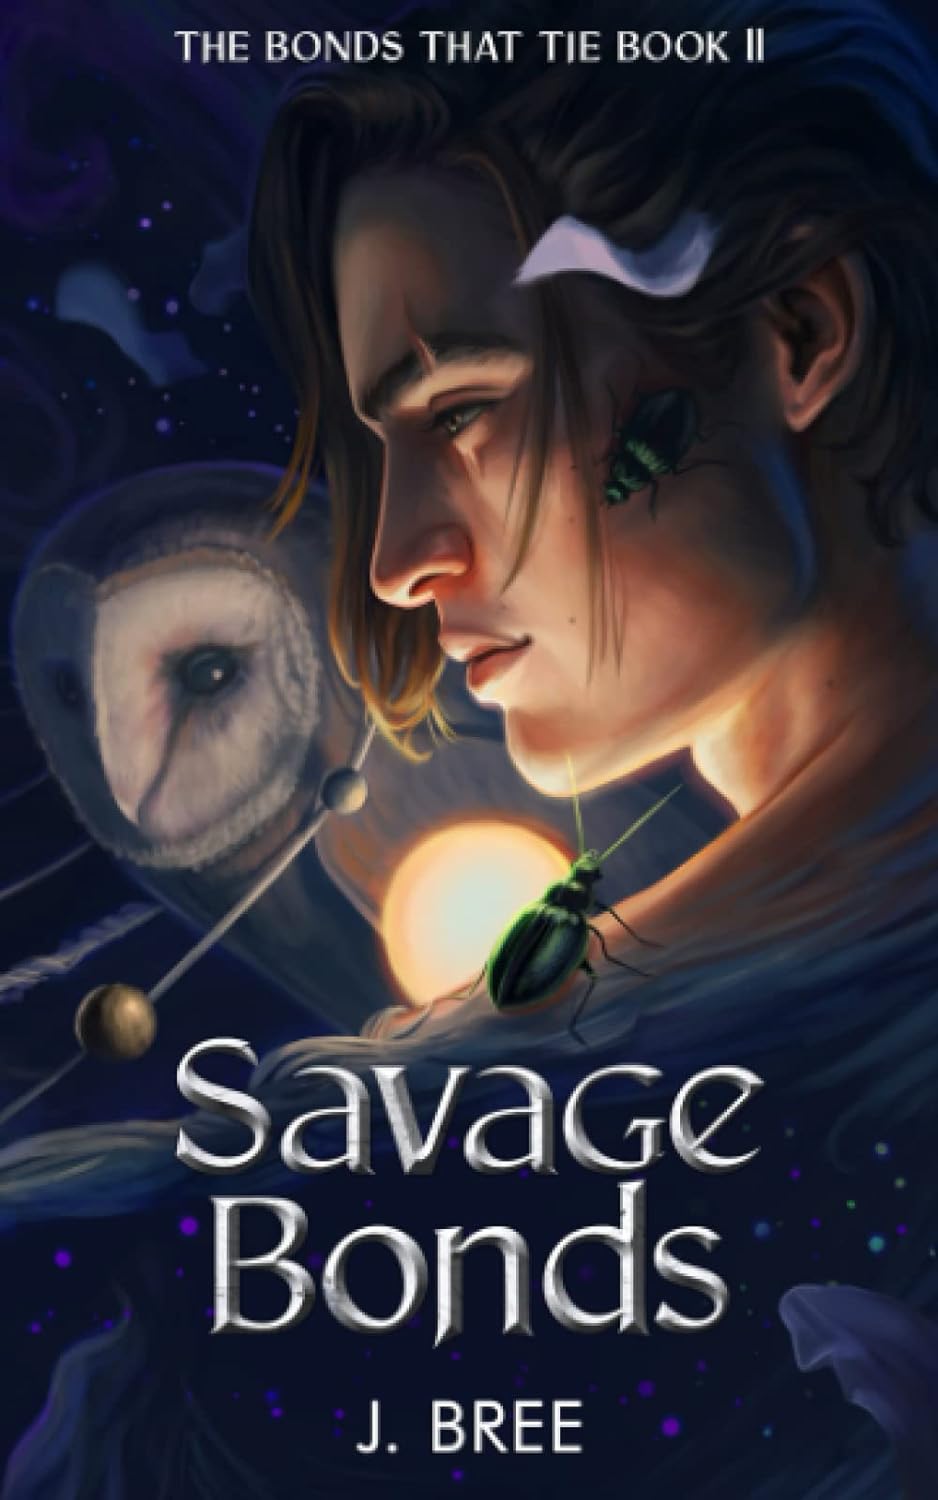 the cover of the book savace bonds